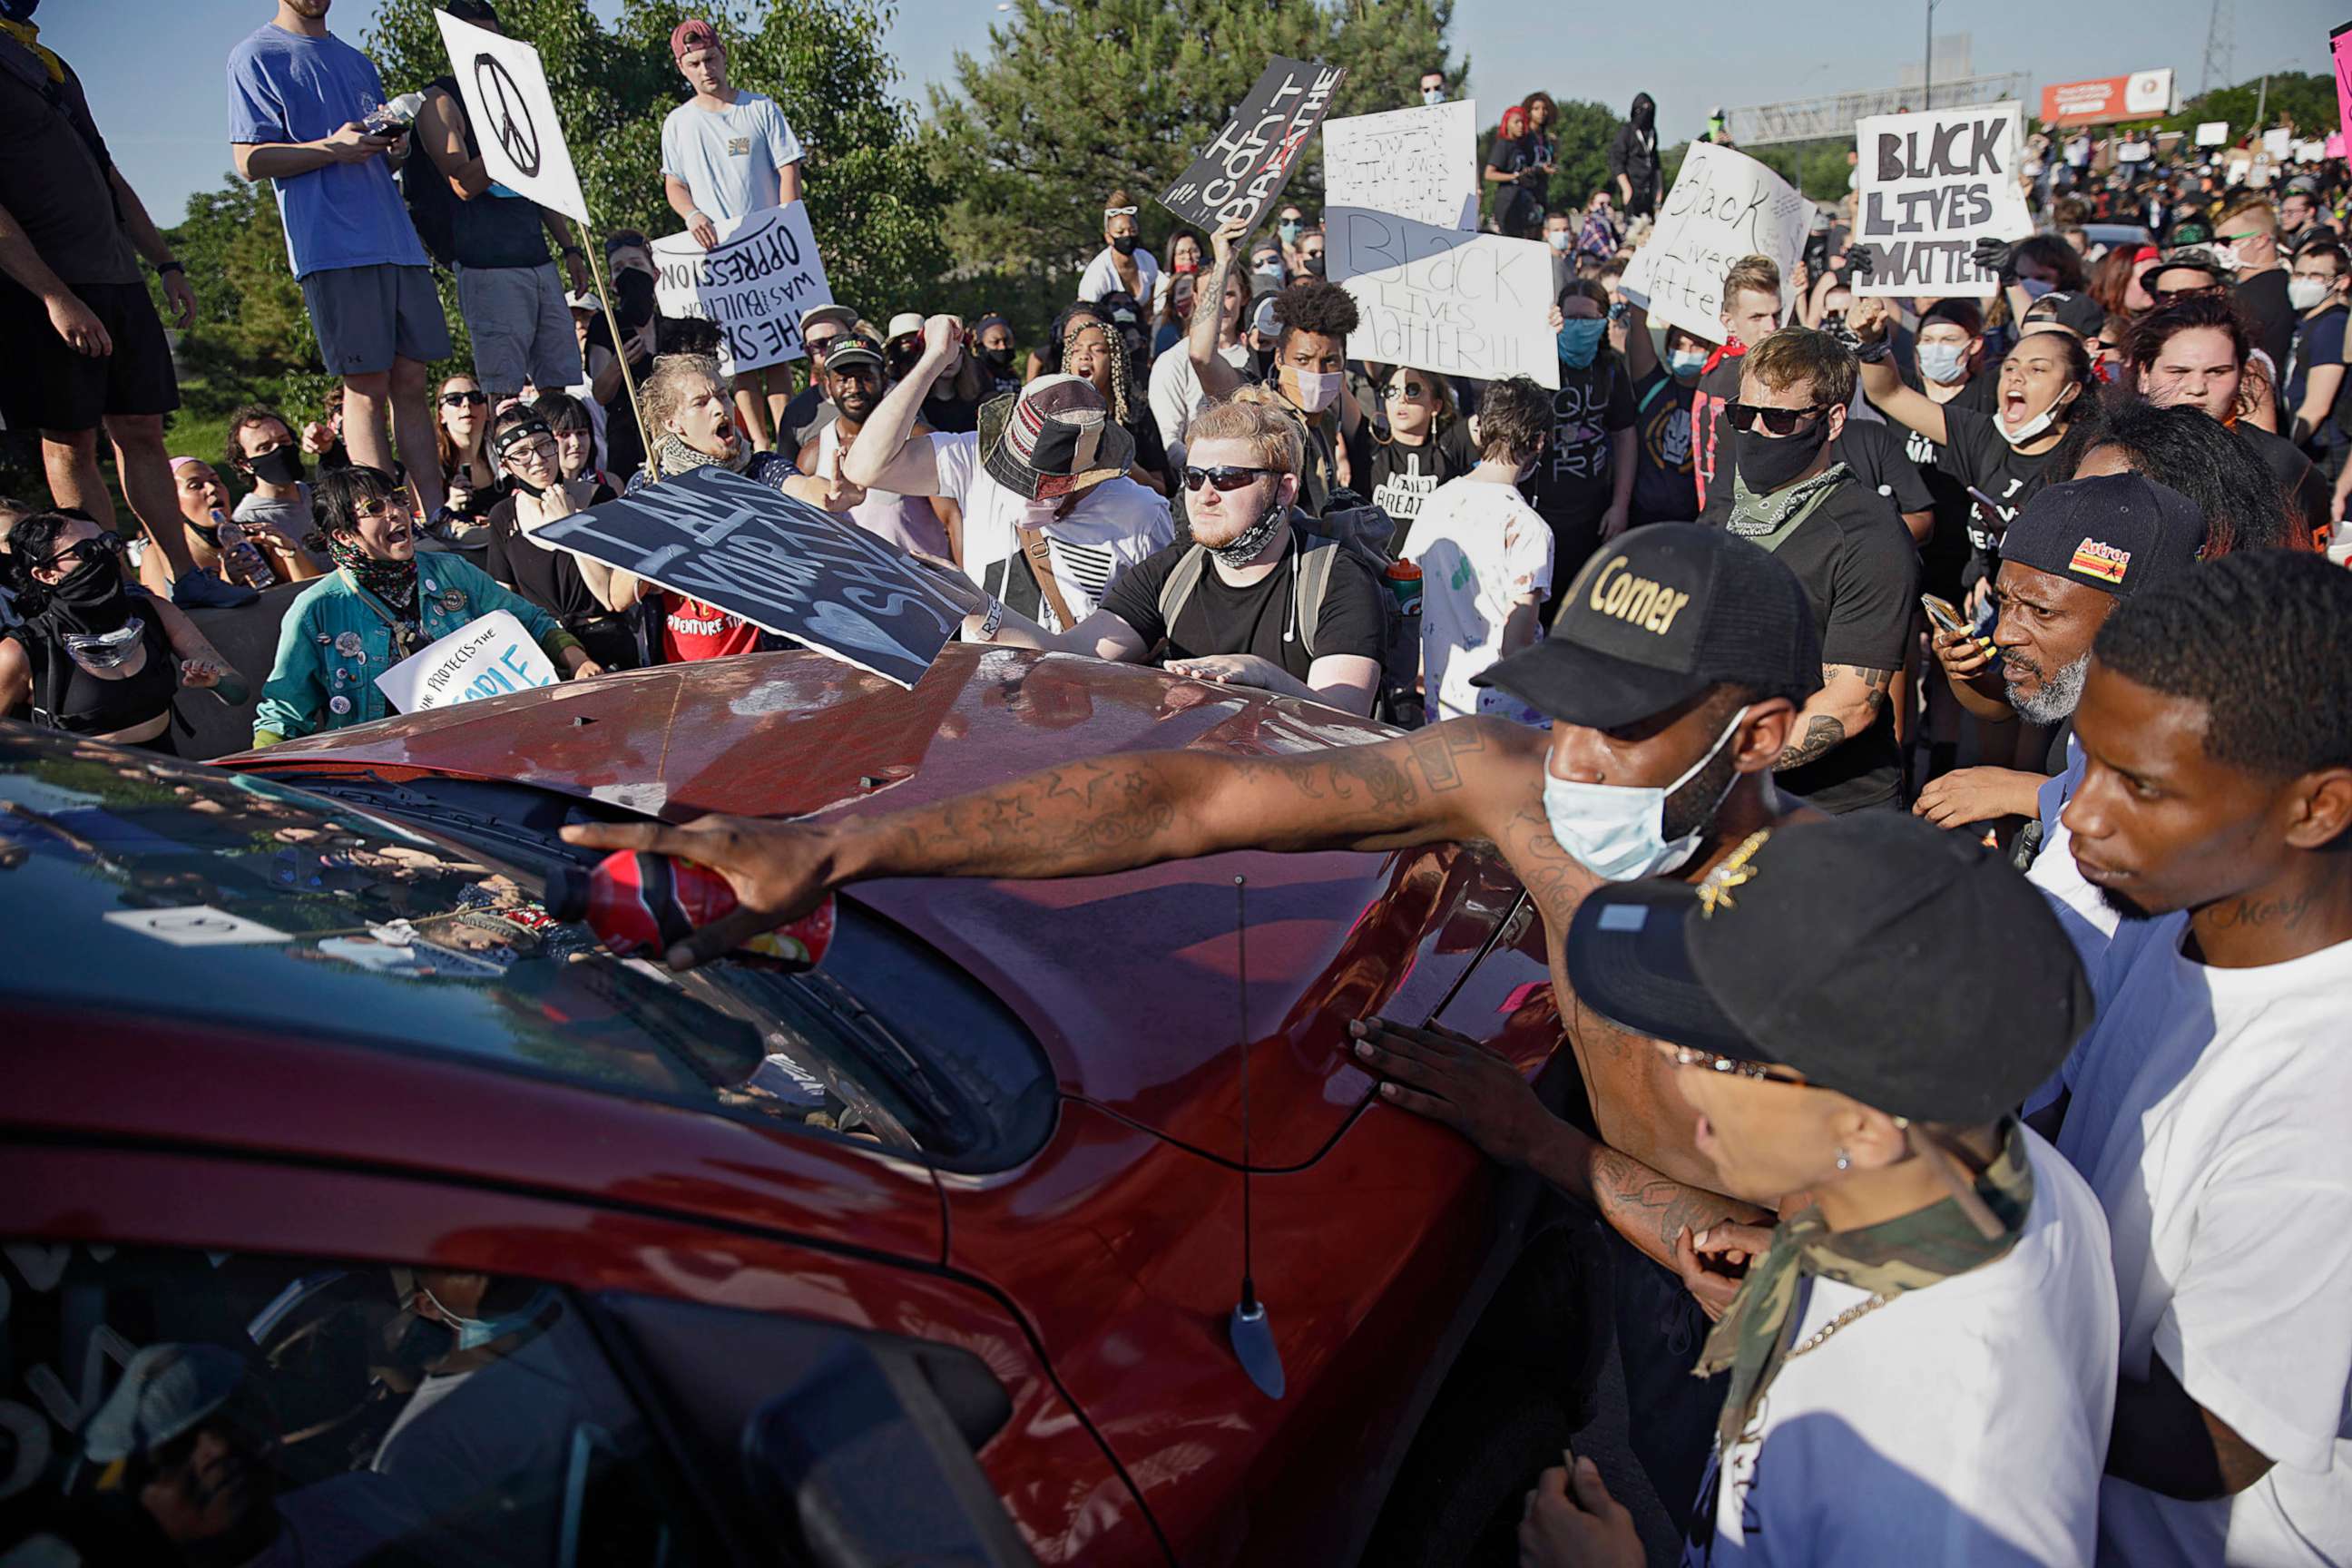 PHOTO: Protesters surround a truck shortly before it drove through the group injuring several on Interstate 244 in Tulsa, Okla., May 31, 2020.